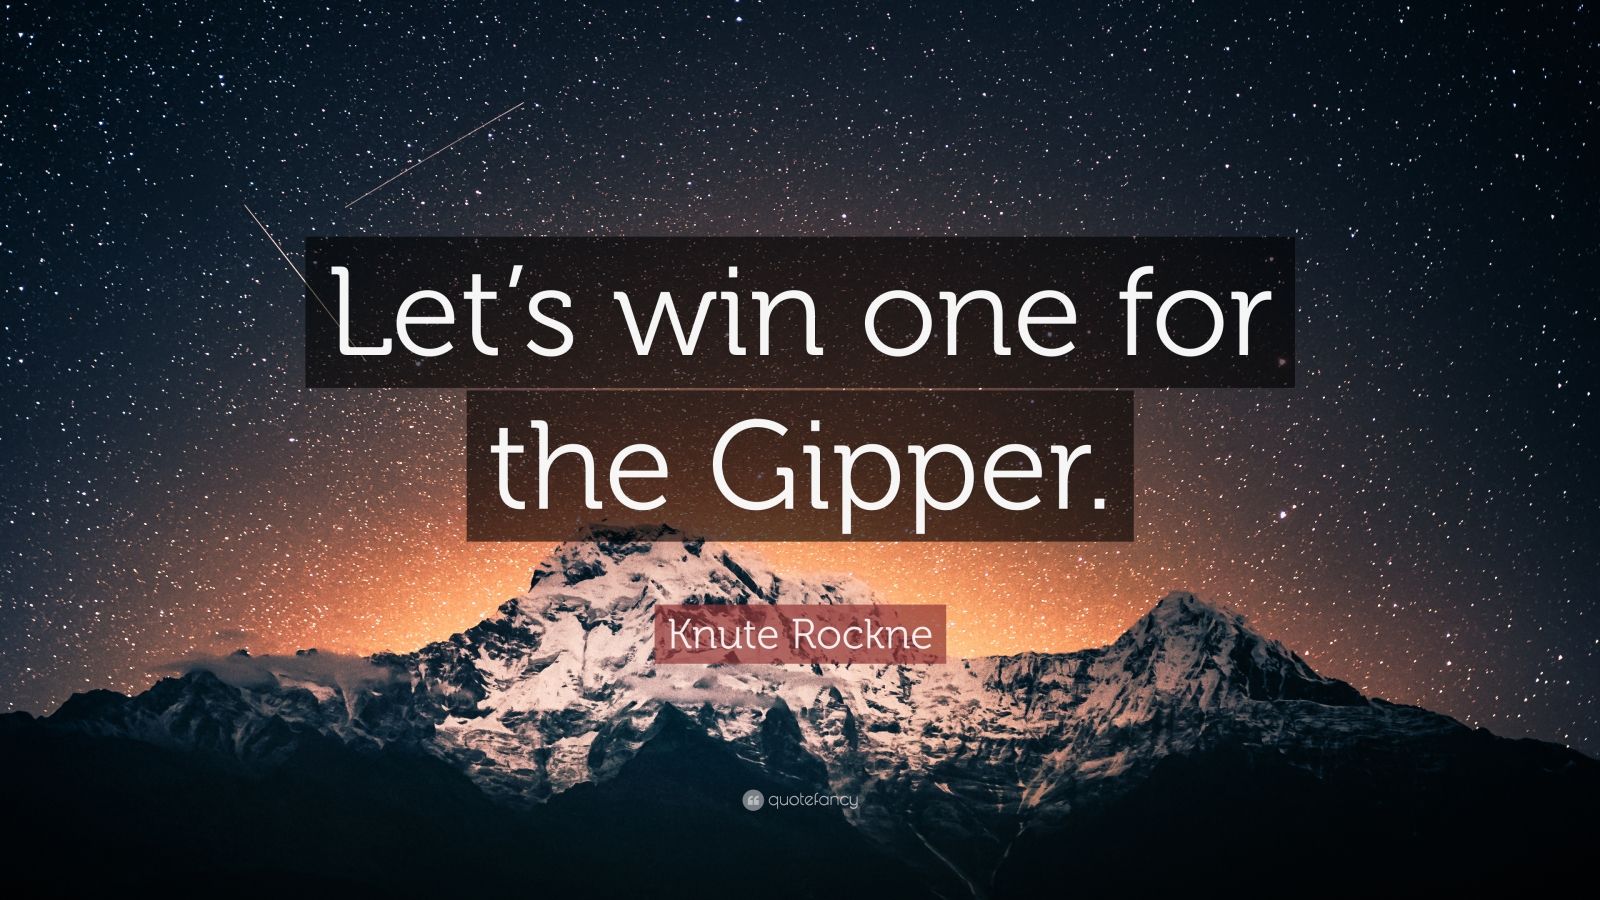 2488856 Knute Rockne Quote Let s win one for the Gipper